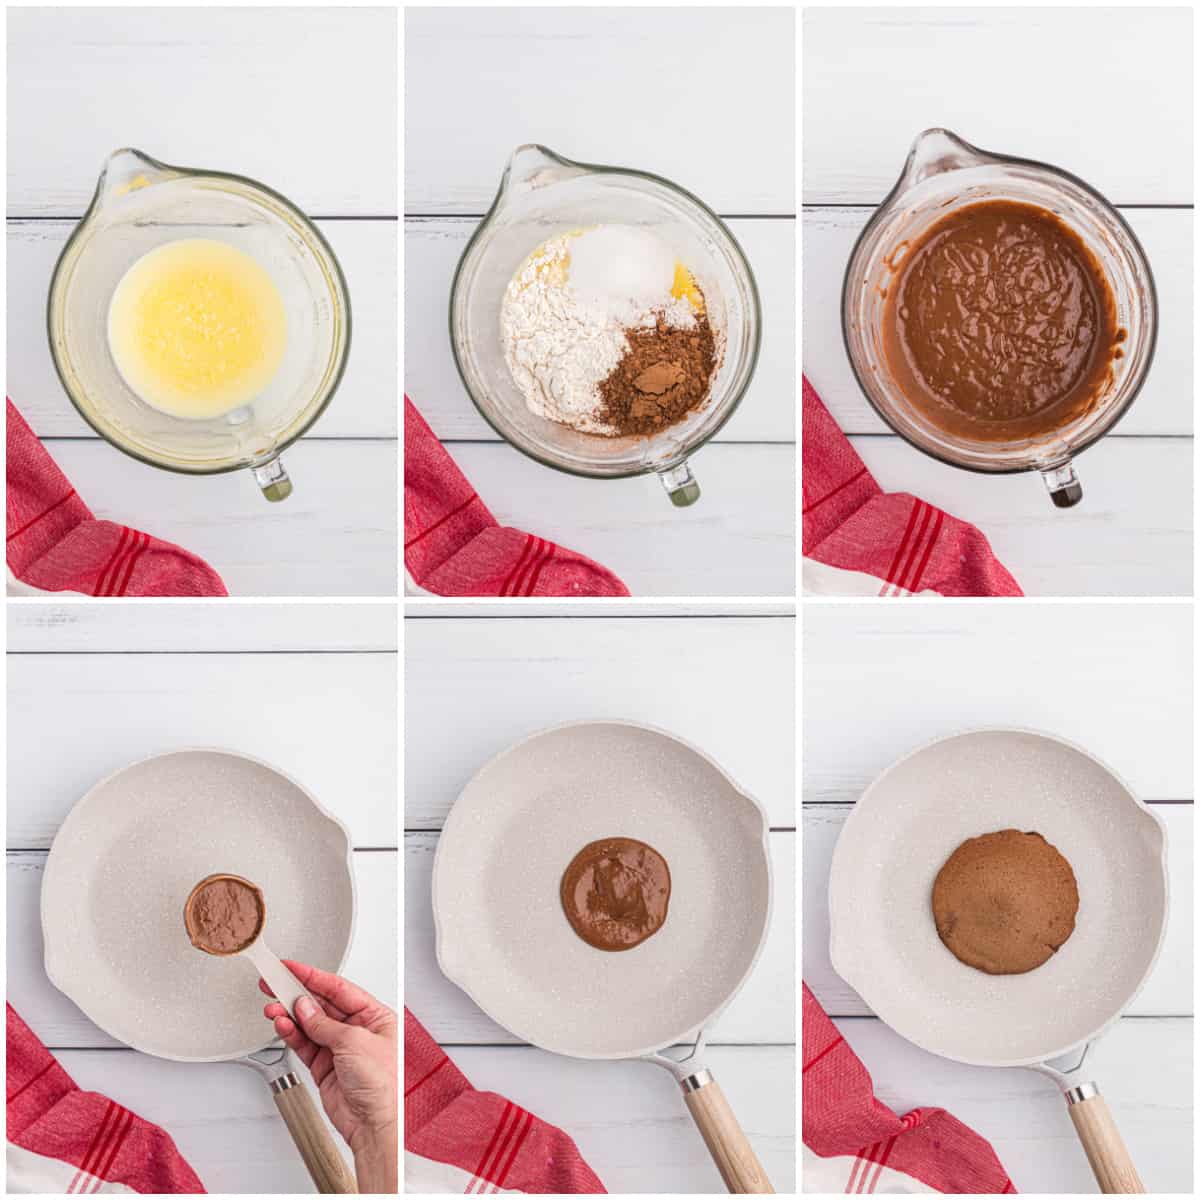 Step by step photos on how to make Chocolate Pancakes.